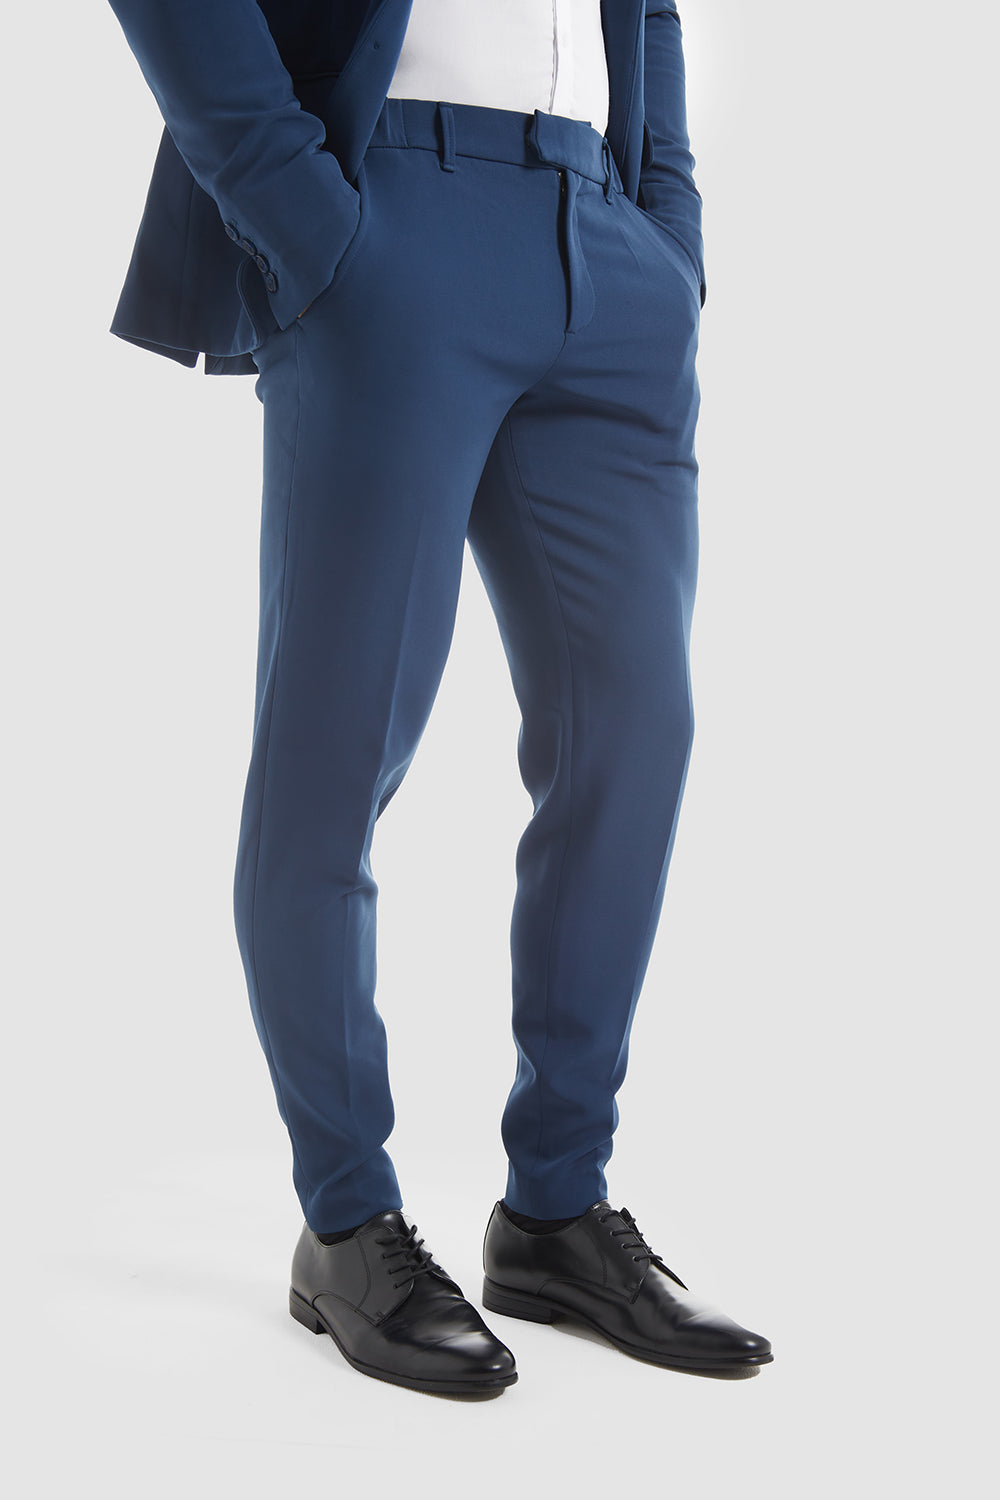 Mens Trouser Shopping | Buy Mens Trousers Online in India | G3+ fashion